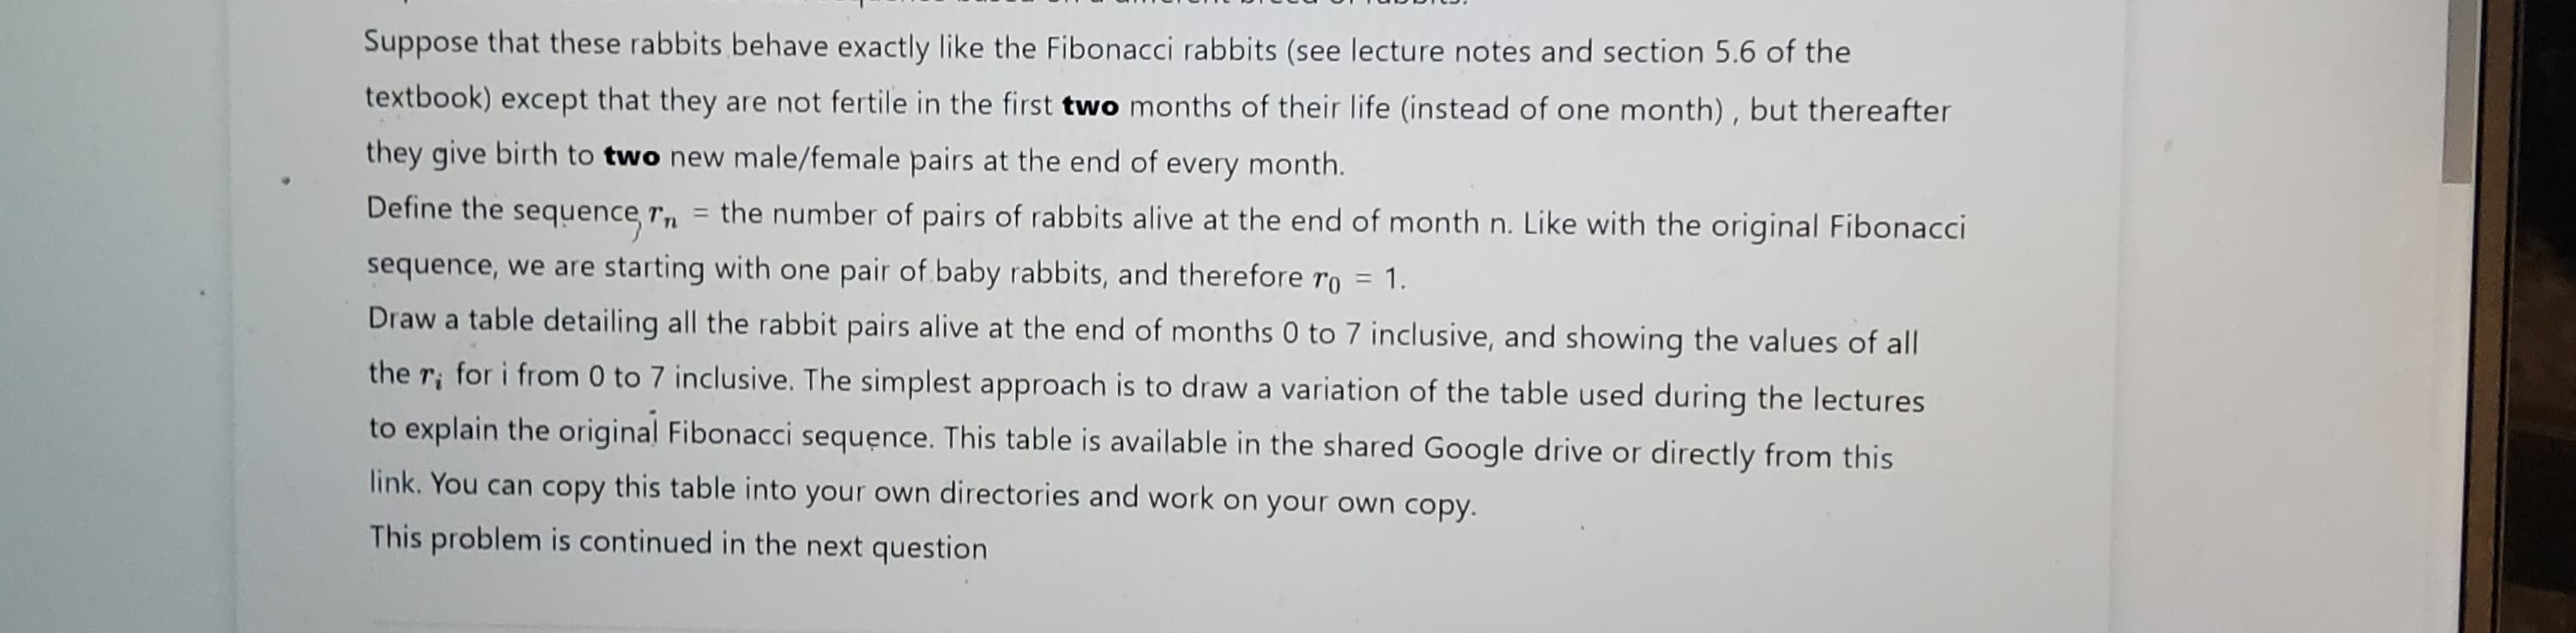 Suppose that these rabbits behave exactly like the Fibonacci rabbits (see lecture notes and section 5.6 of the
textbook) except that they are not fertile in the first two months of their life (instead of one month), but thereafter
they give birth to two new male/female pairs at the end of every month.
Define the sequence, în
= the number of pairs of rabbits alive at the end of month n. Like with the original Fibonacci
sequence, we are starting with one pair of baby rabbits, and therefore ro = 1.
Draw a table detailing all the rabbit pairs alive at the end of months 0 to 7 inclusive, and showing the values of all
the r, for i from 0 to 7 inclusive. The simplest approach is to draw a variation of the table used during the lectures
to explain the original Fibonacci sequence. This table is available in the shared Google drive or directly from this
link. You can copy this table into your own directories and work on your own copy.
This problem is continued in the next question